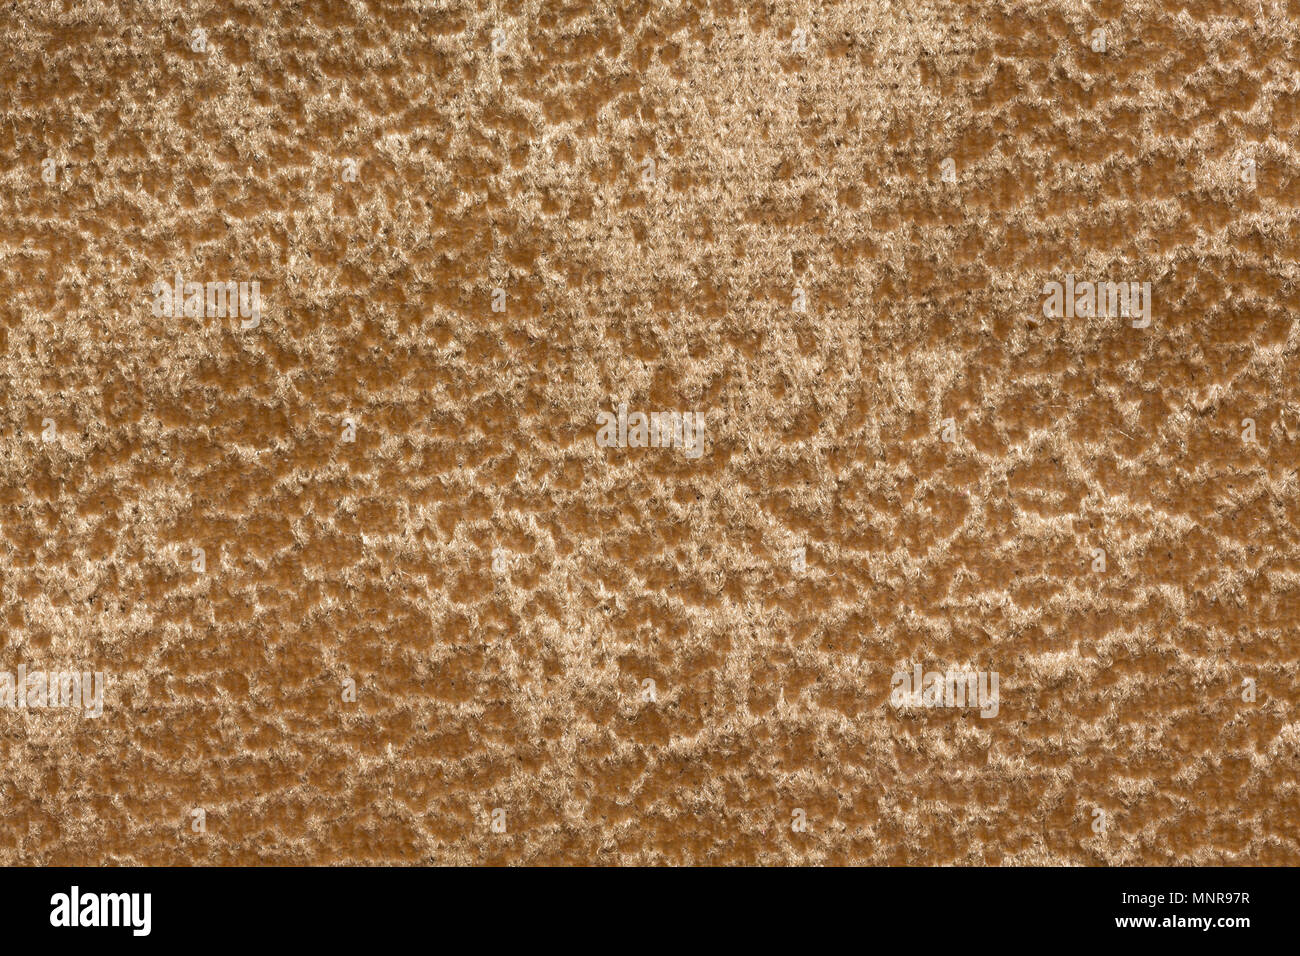 Stylish Mottled Fabric Texture In Admirable Brown Tone Stock Photo Alamy